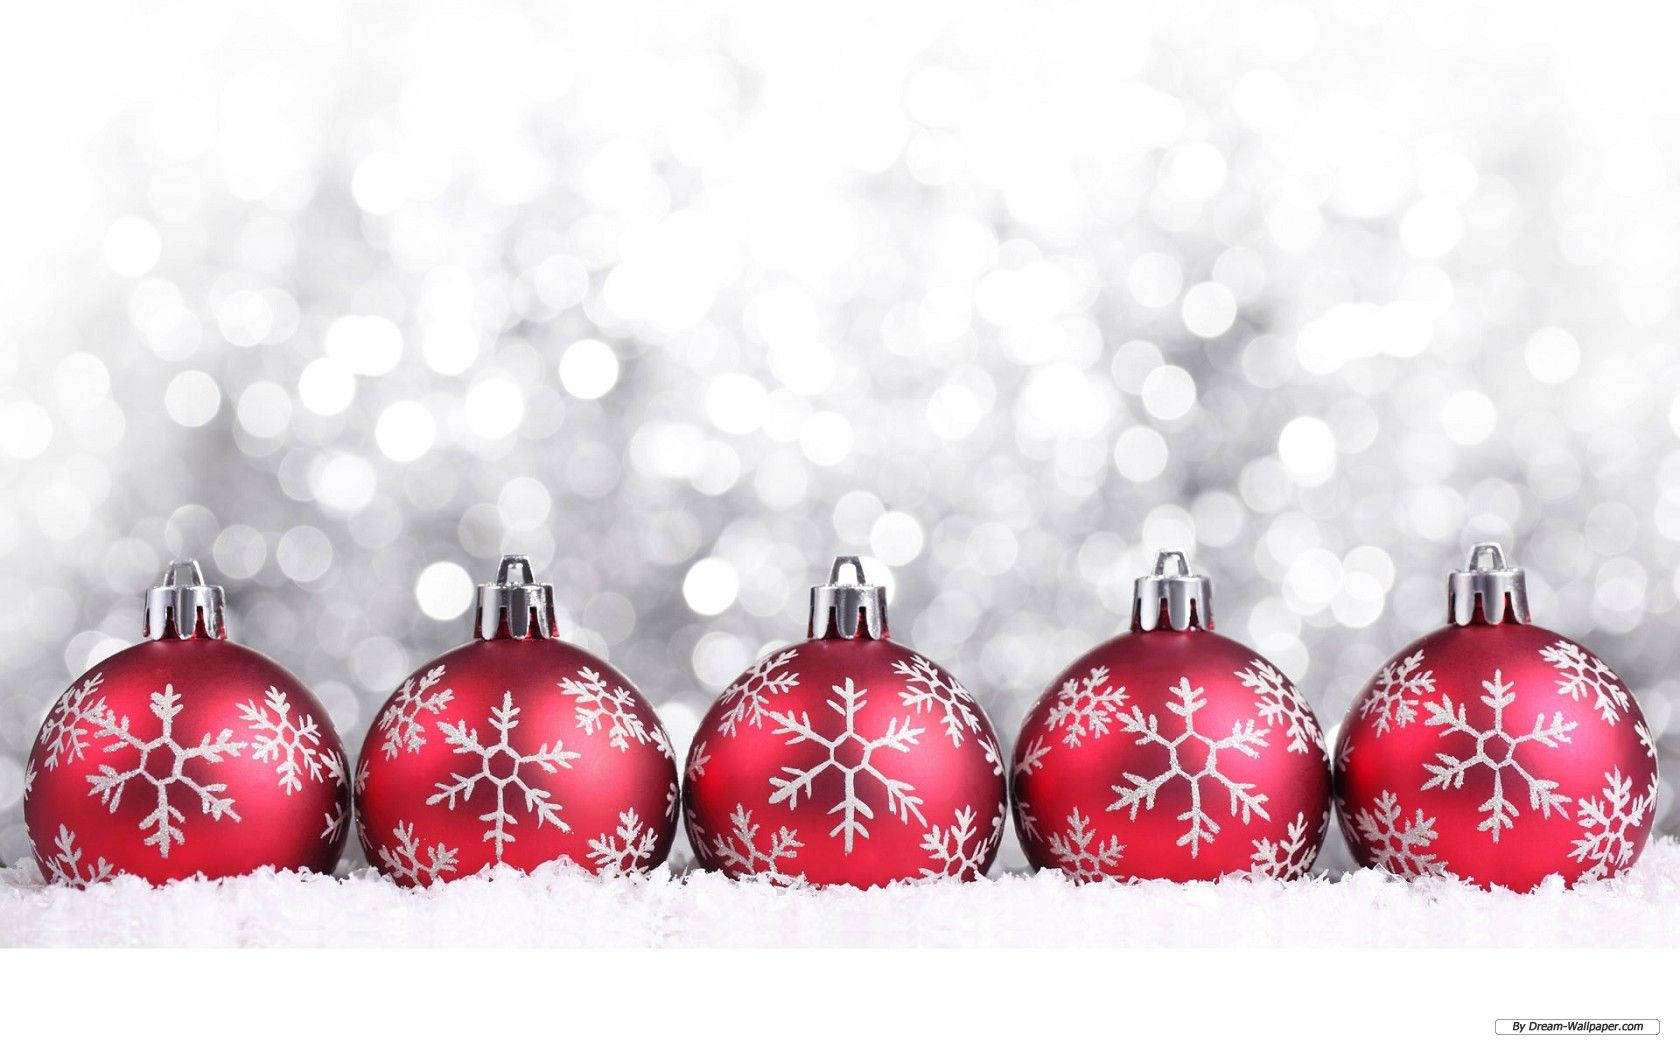 Red Christmas Balls With Snowflakes Laying On Snow Wallpaper